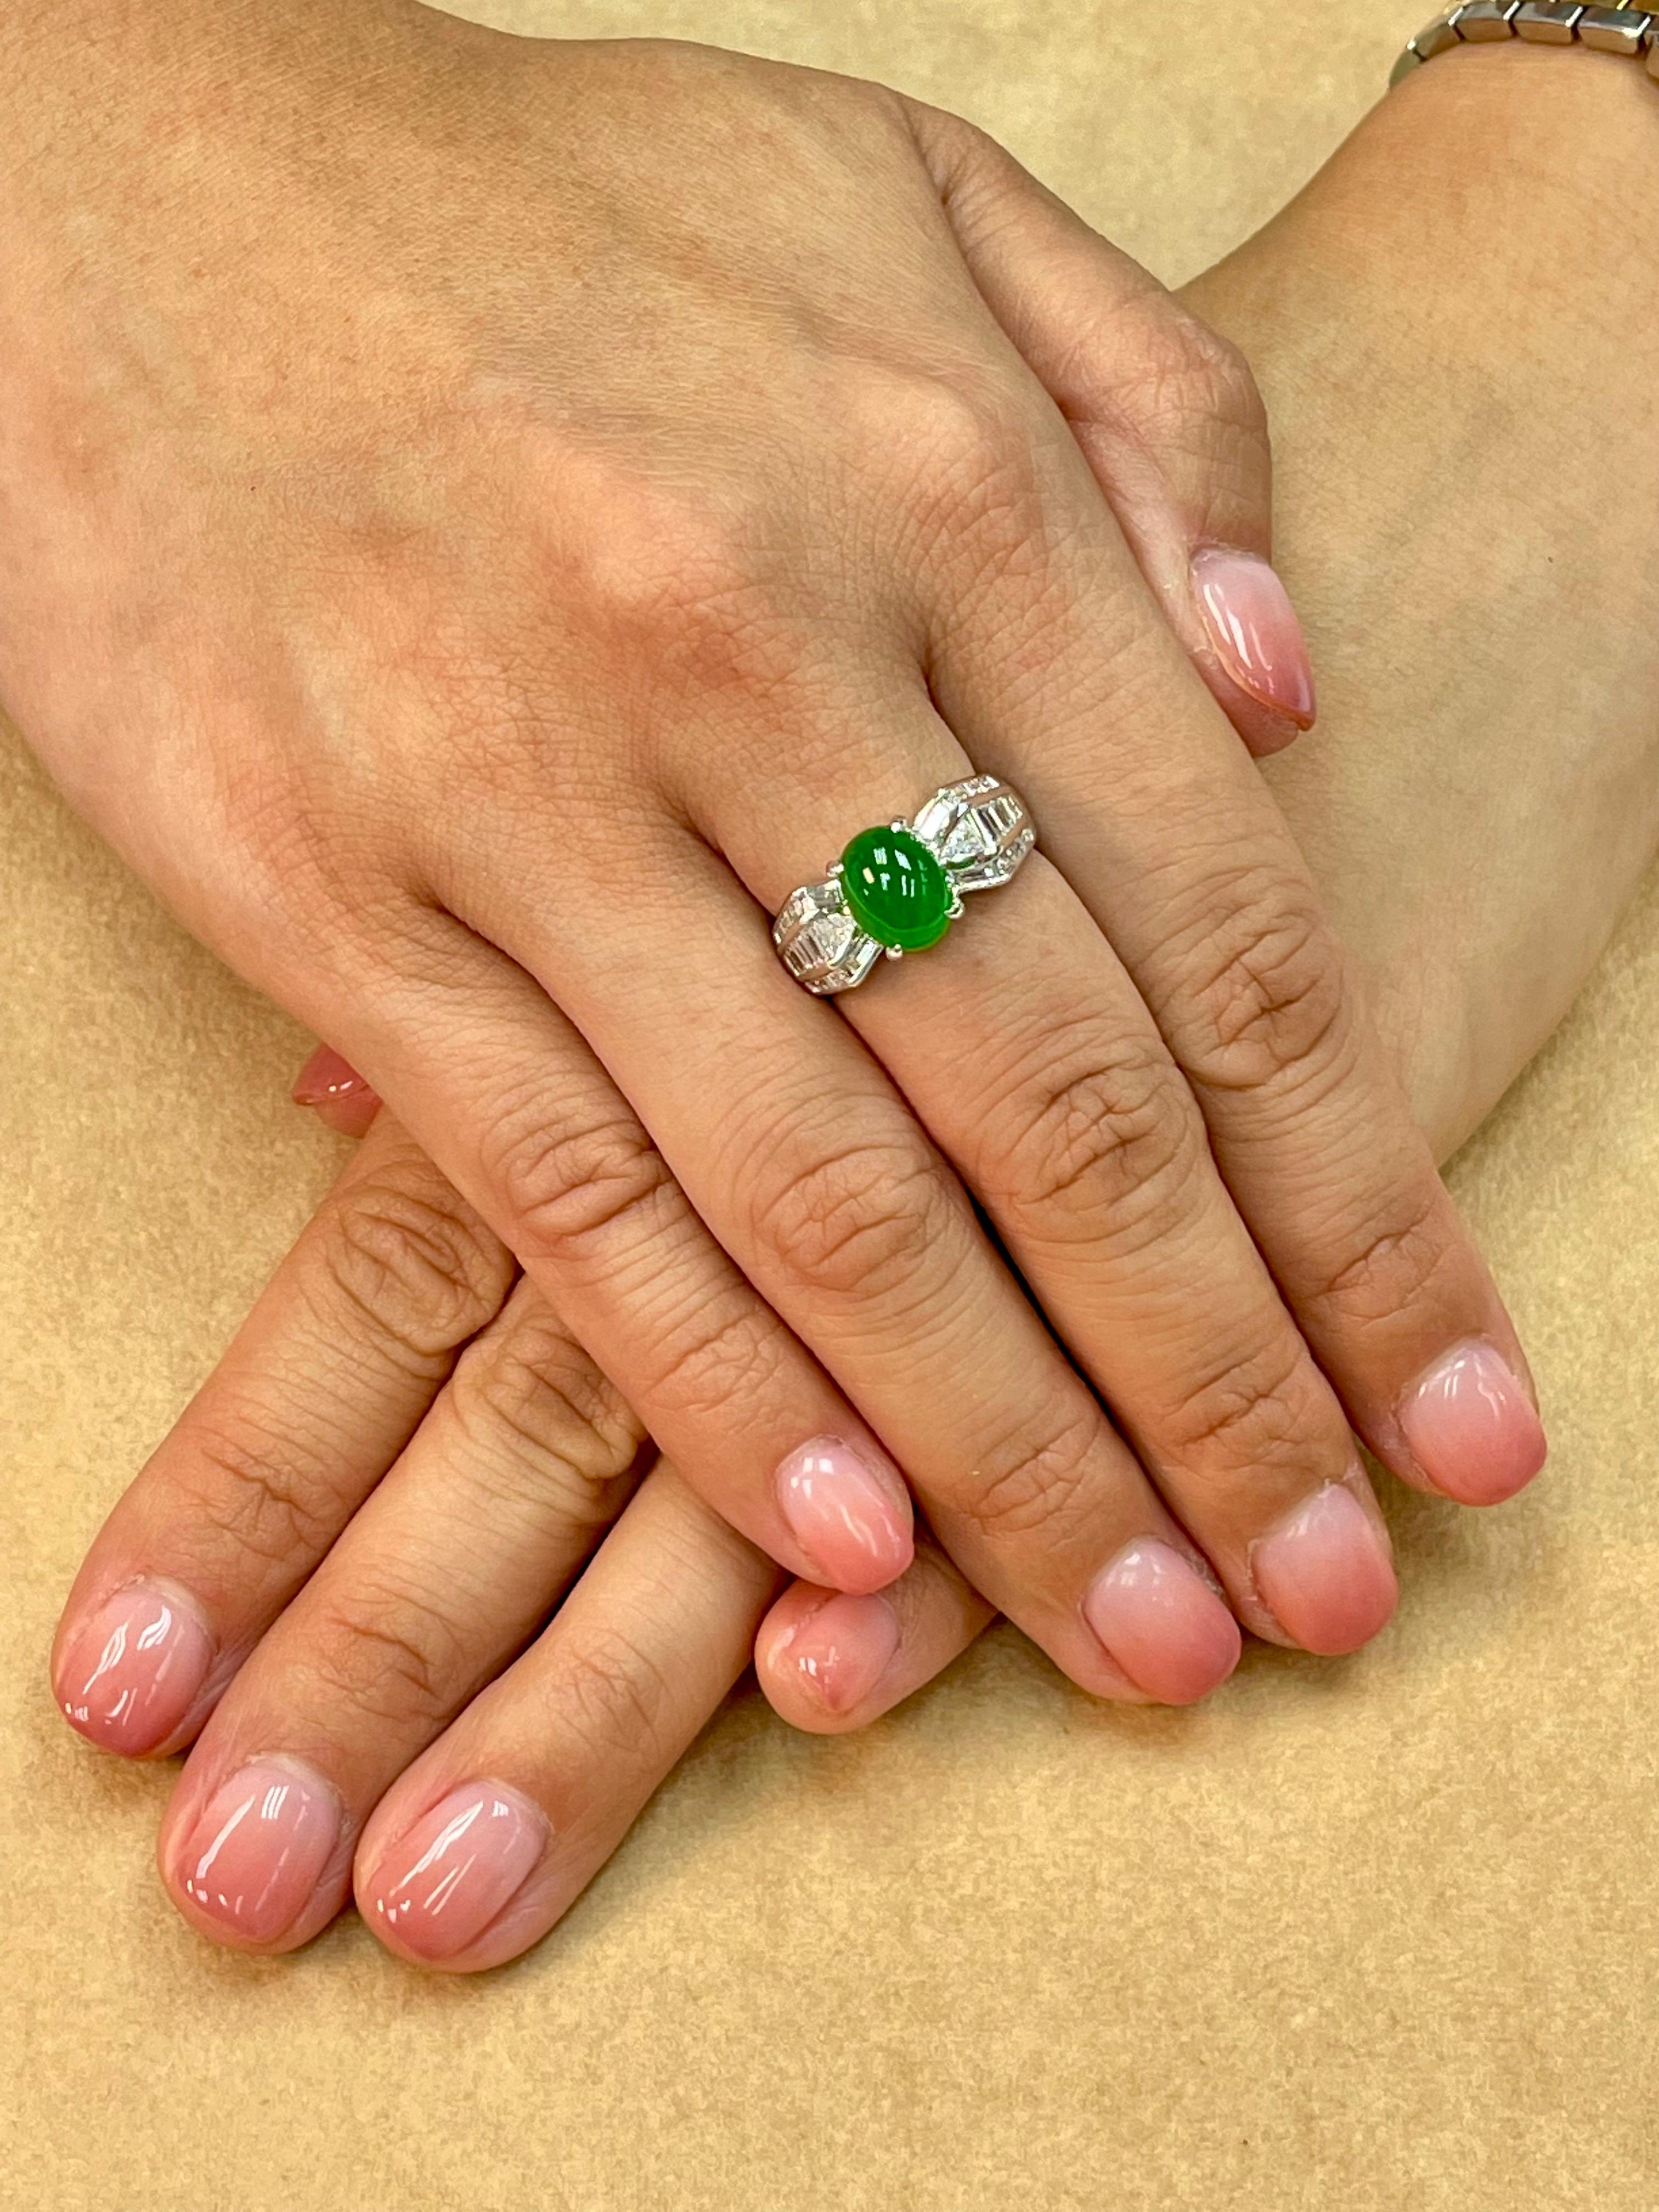 Please check out the HD video. Here is a bright apple green oval high domed cabochon jade and diamond ring. This jade is one step away from being a true imperial jade! It is certified as natural jadeite jade with no treatment or enhancement. The